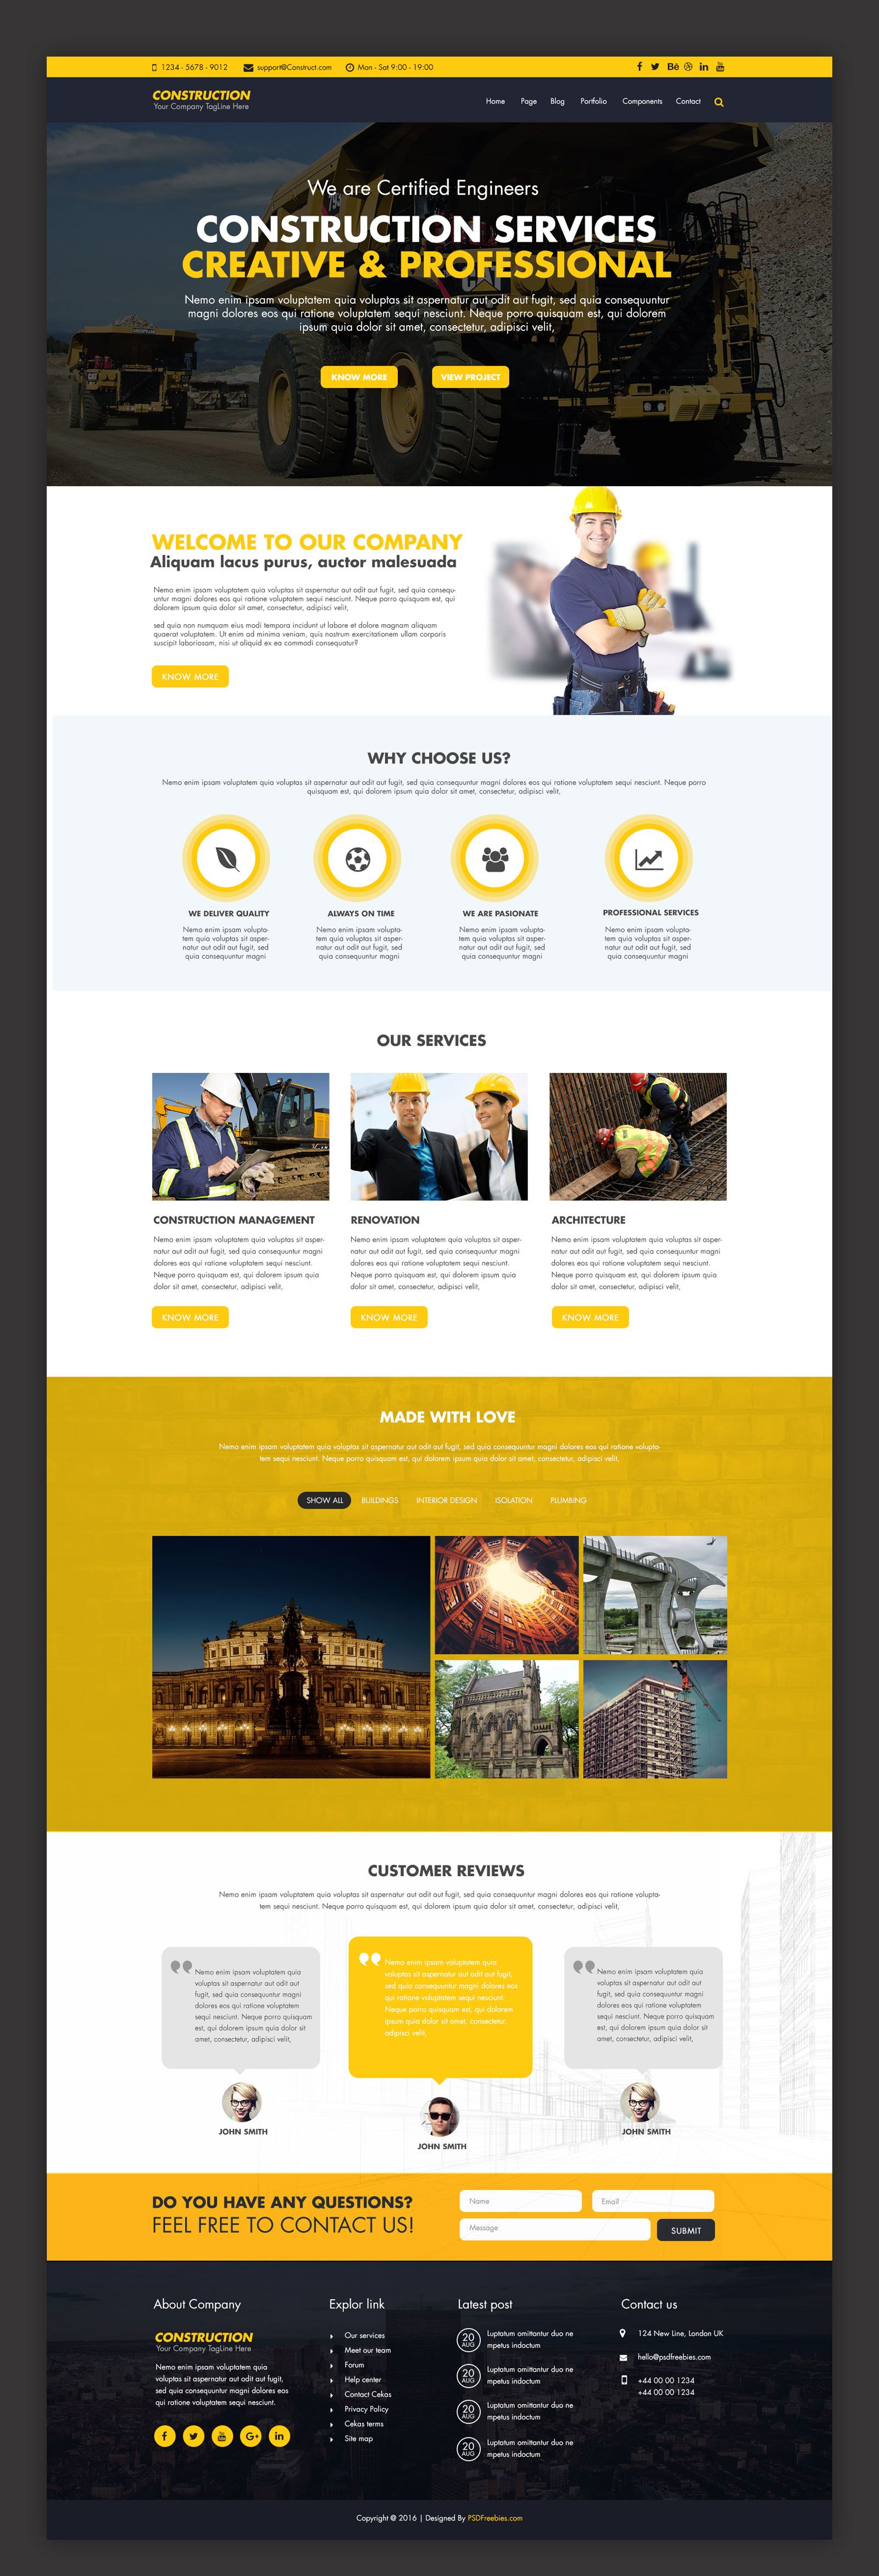 Construction Company Website Template Free Psd Corporate Website Design Free Website Templates Website Design Layout